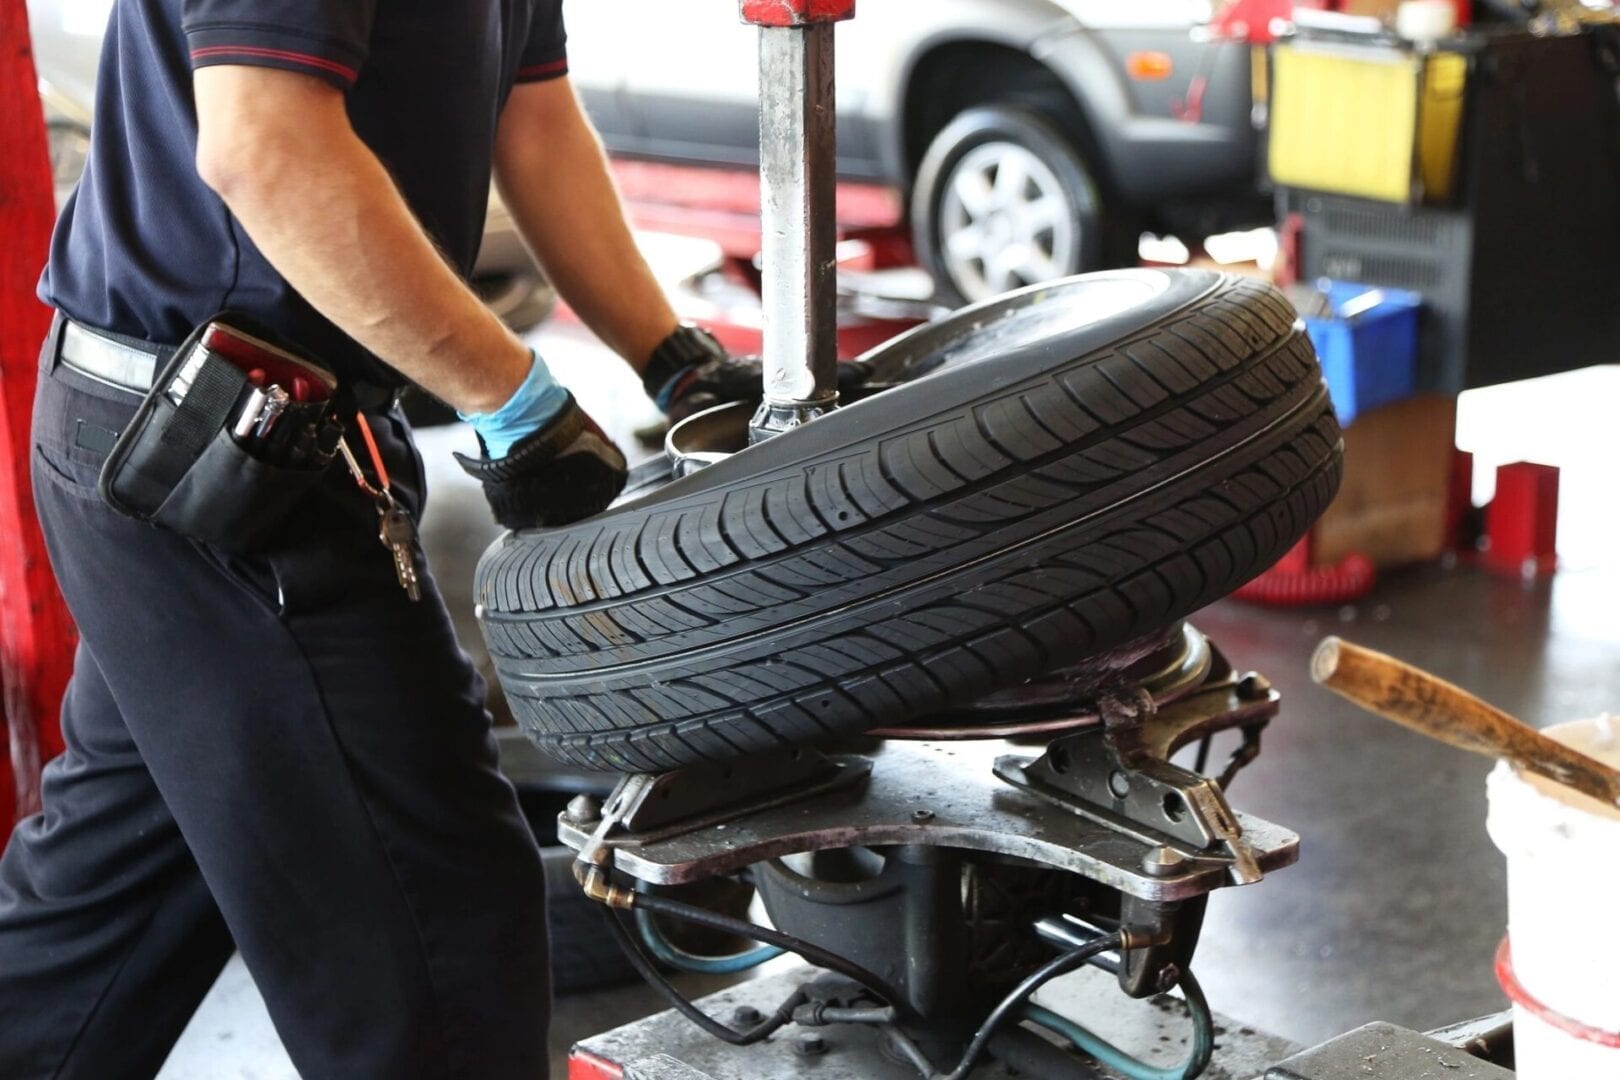 A person working on a tire in a garage.